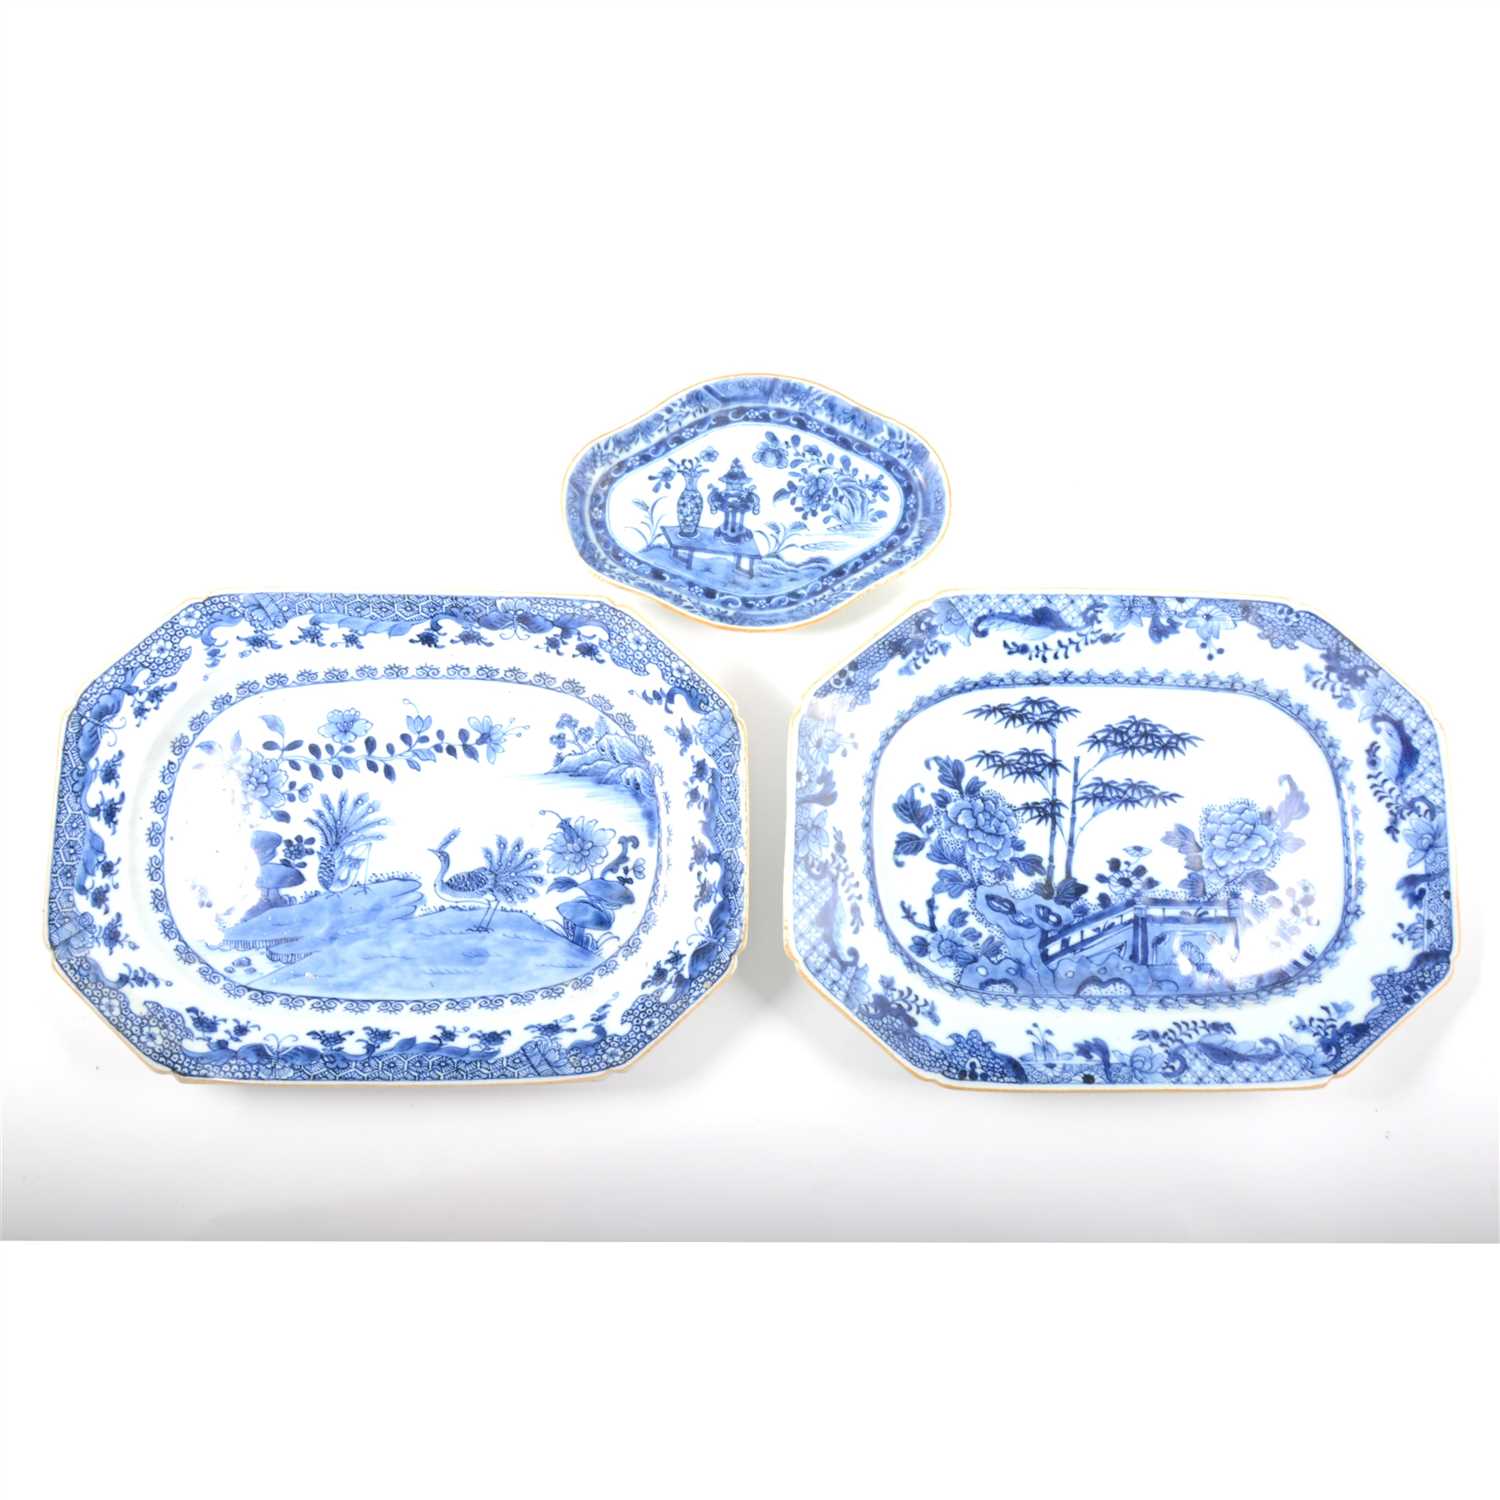 Lot 57 - Chinese porcelain blue and white dish, together with a similar dish and a stand